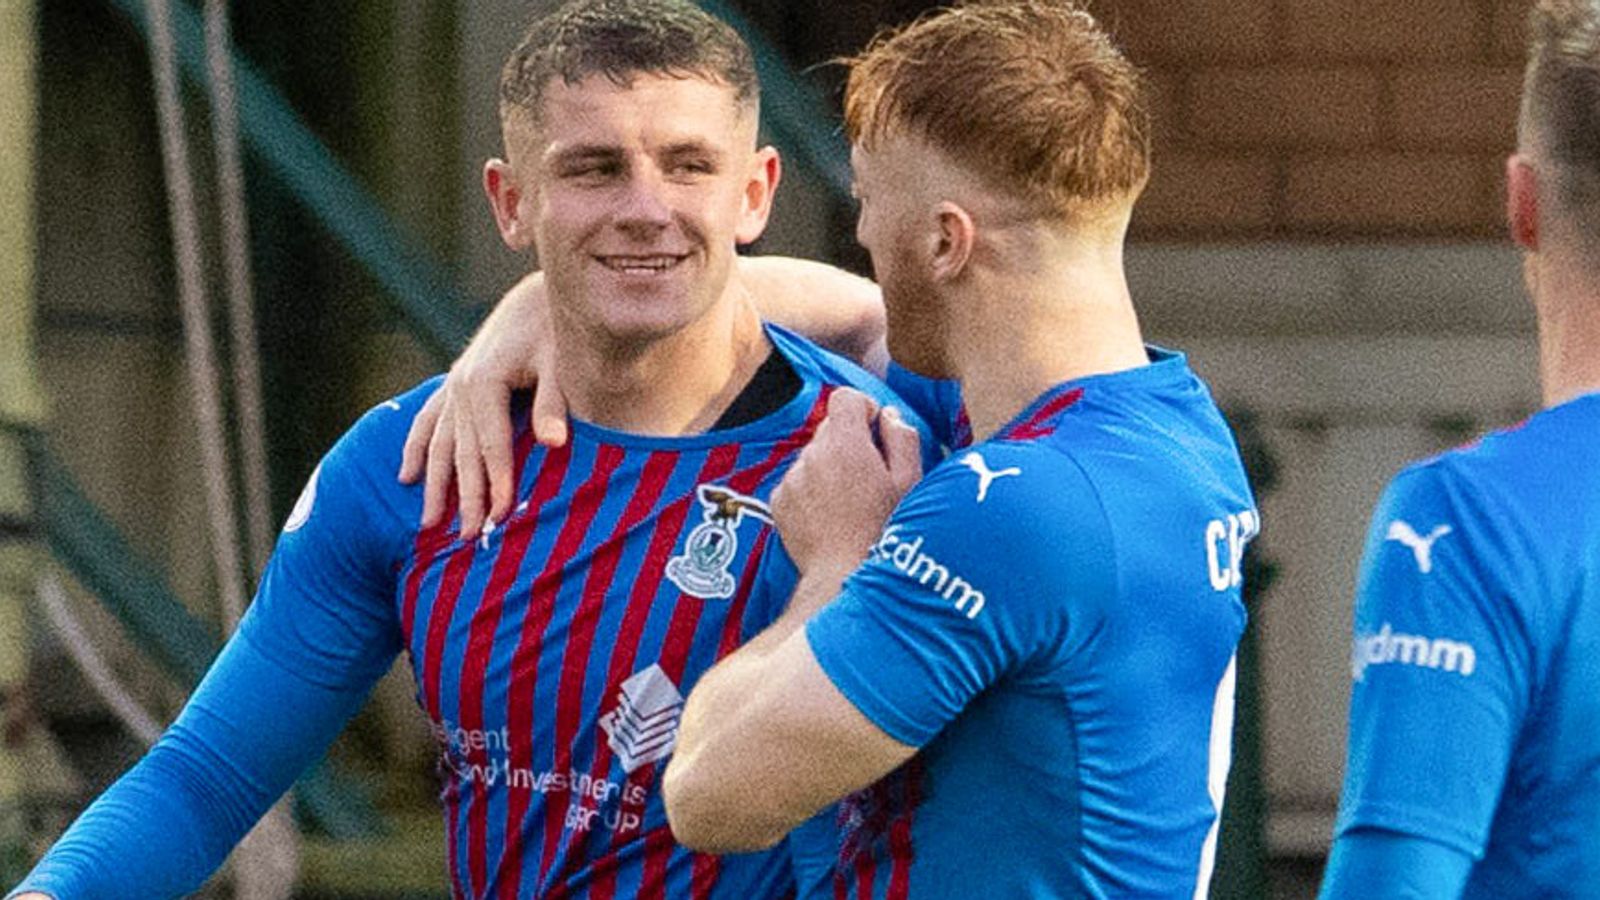 Inverness Caledonian Thistle 2-2 St Johnstone: St Johnstone let two-goal lead slip in Scottish Premiership play-off first leg